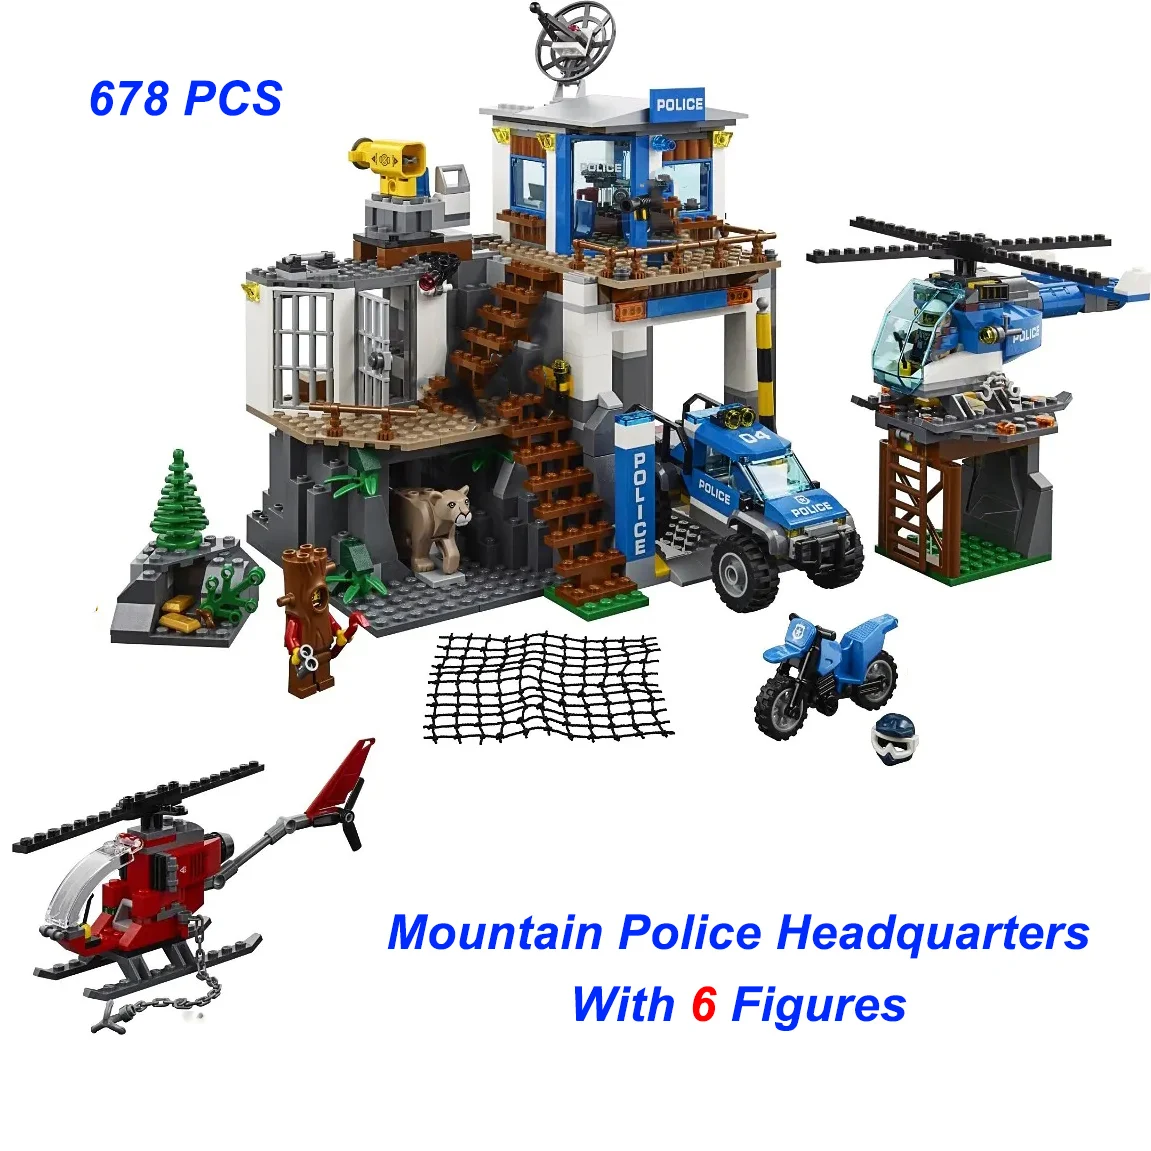 

In stock Mountain Police Headquarters 678pcs 10865 Building Blocks Toy City Series Assembled Bricks Children's Toy Birthday Gift